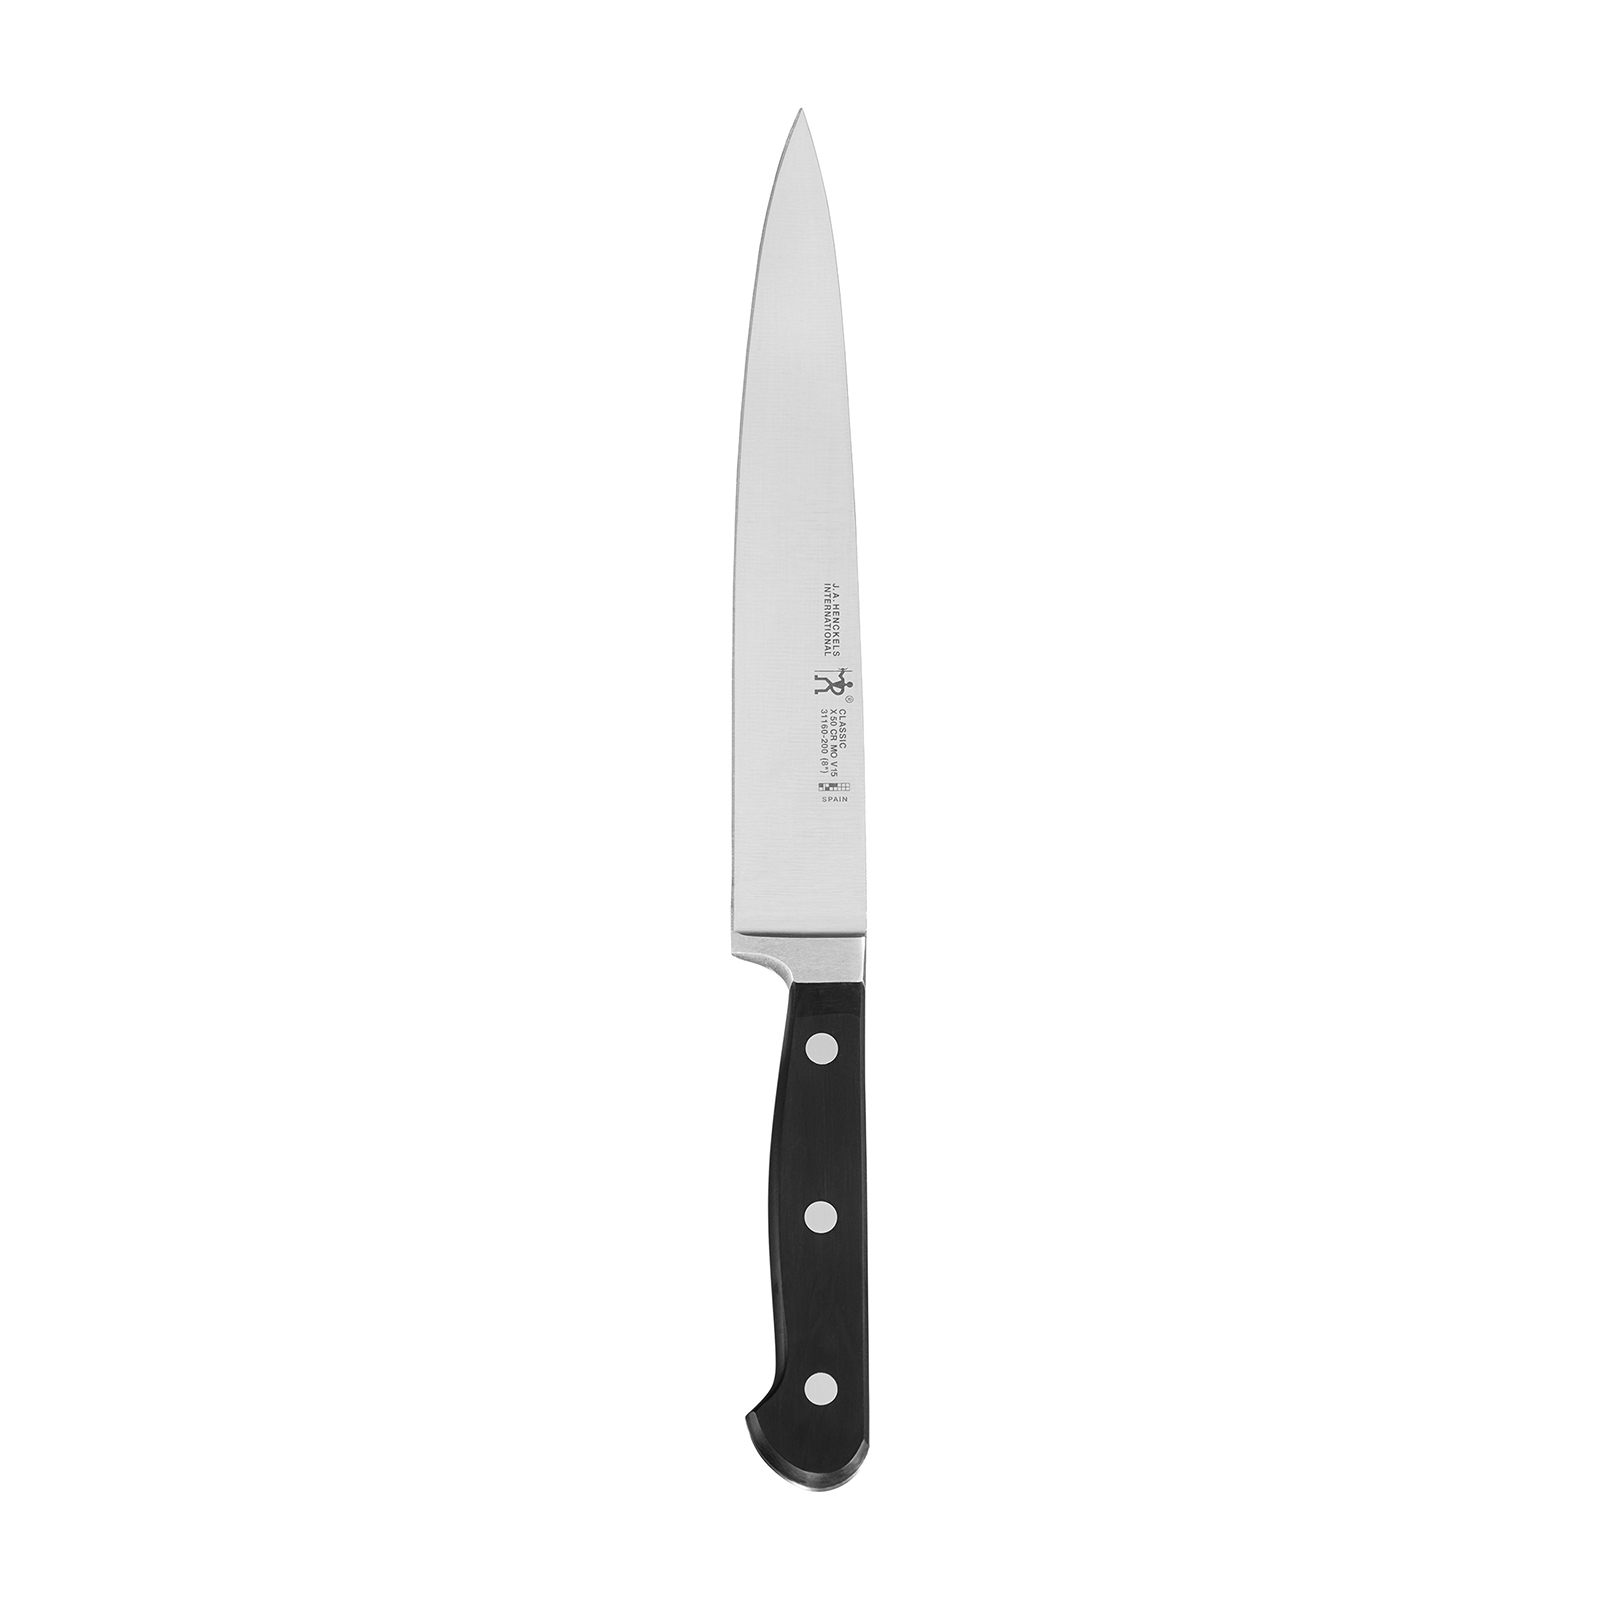 Henckels 8" Classic Carving Knife